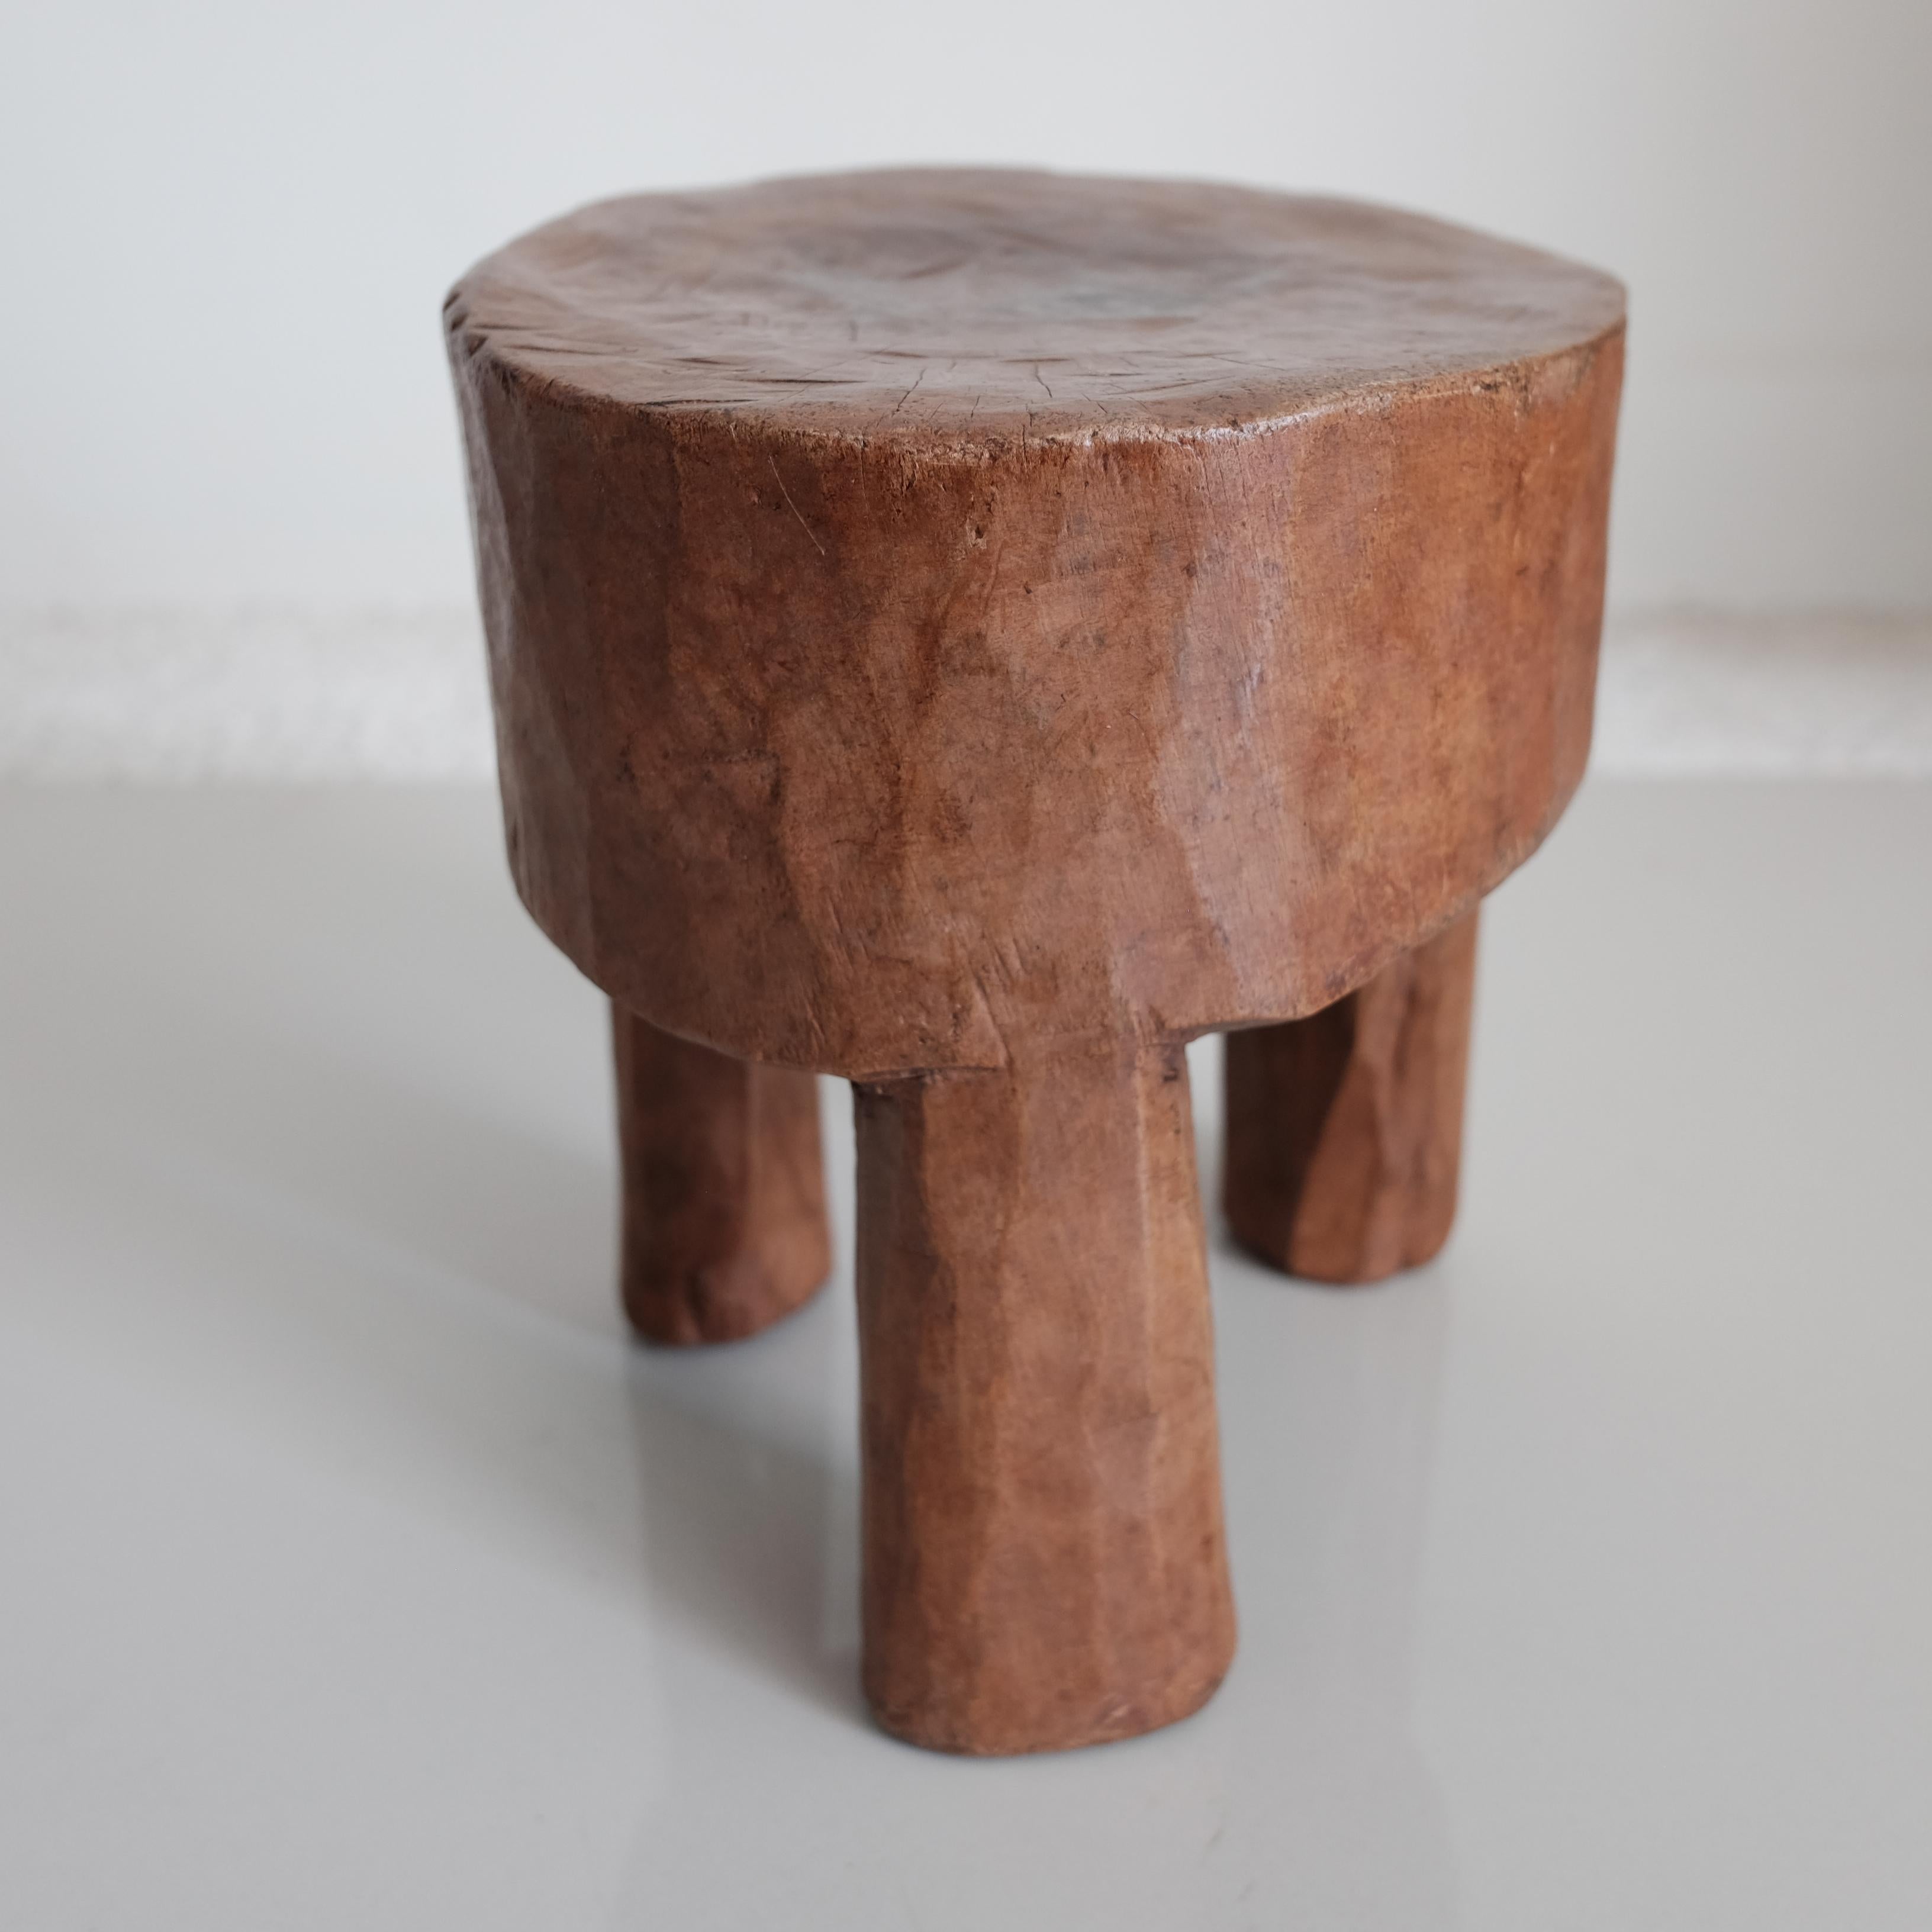 Ivorian Primitive Low Stool from the Senufo tribe of Ivory Coast